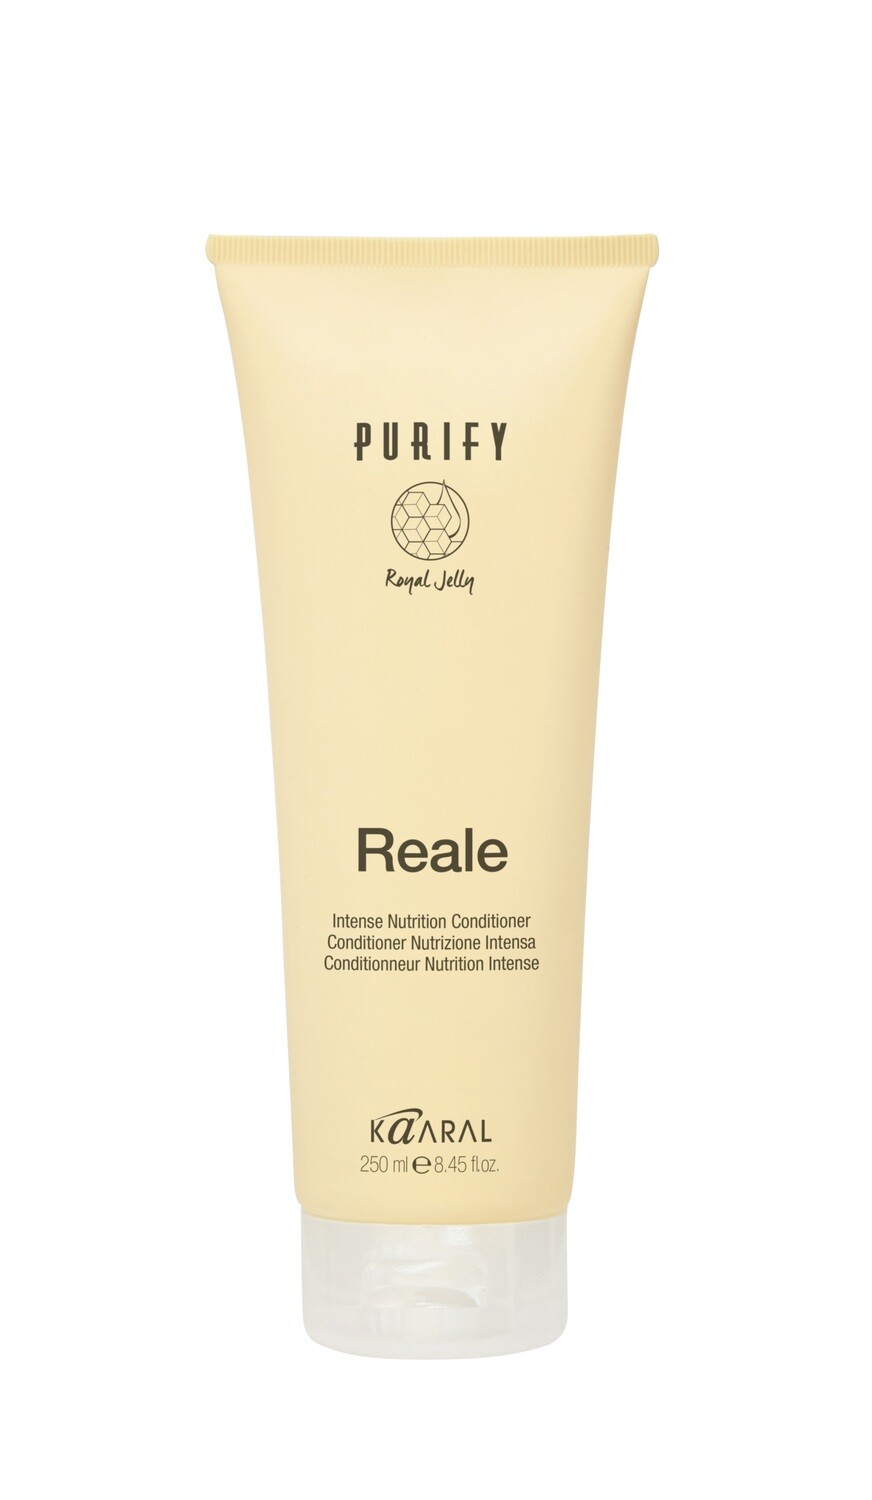 KAARAL PURIFY REALE CONDITIONER NUTRIZIONE INTENSA 250ML